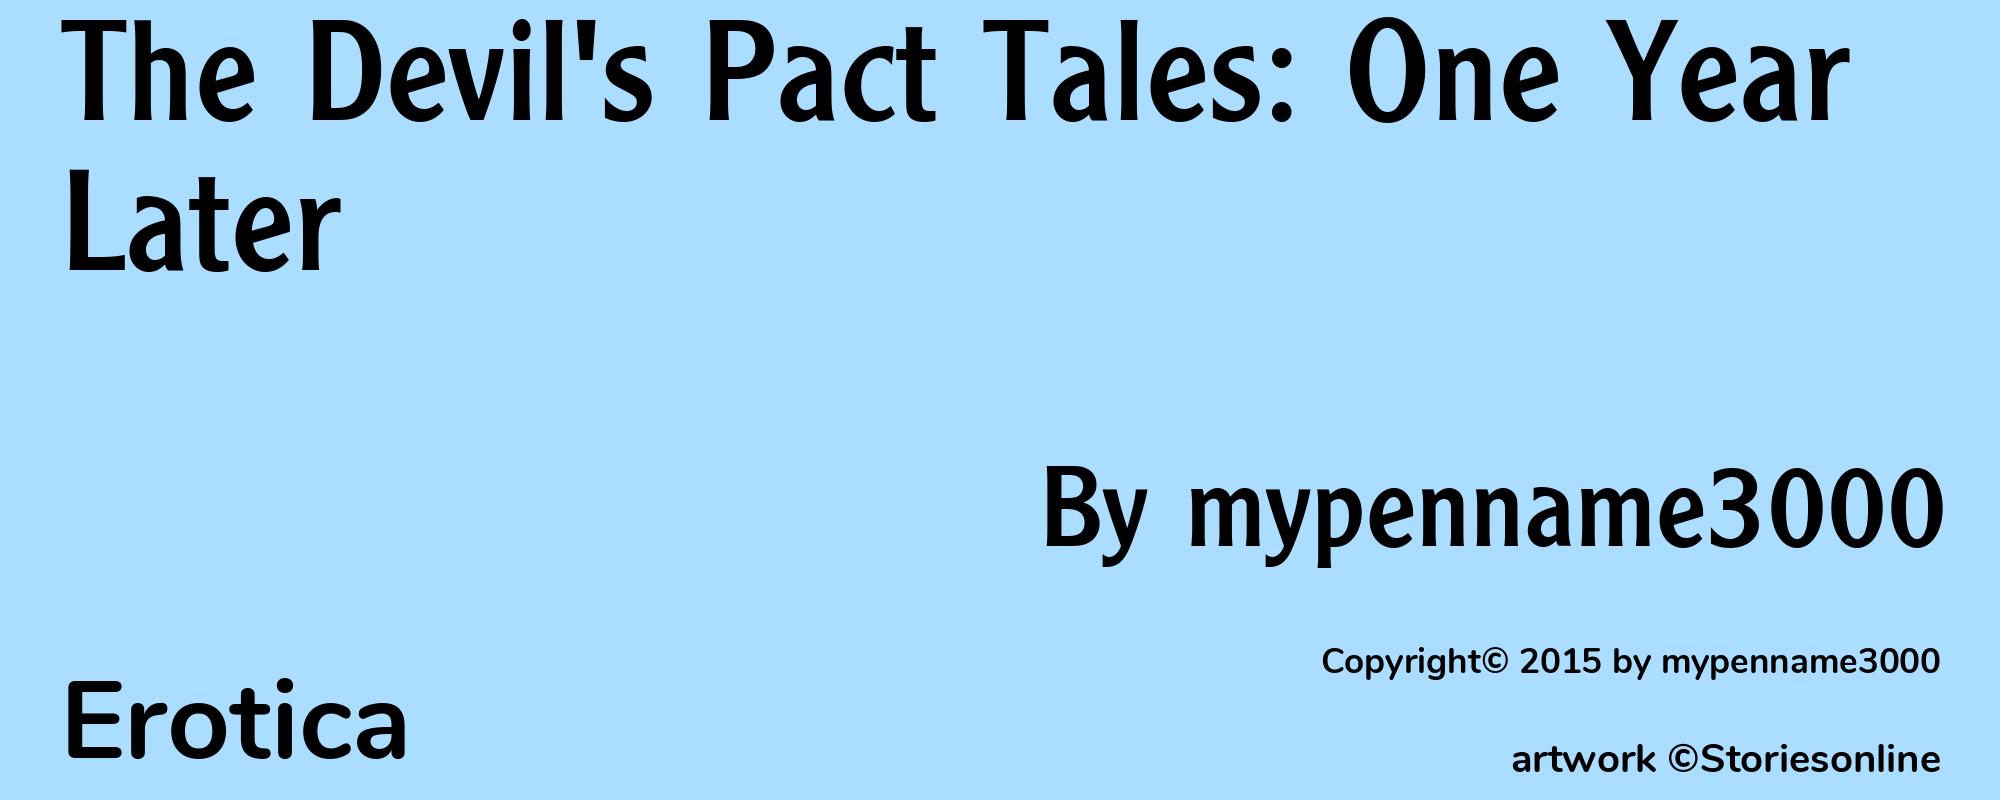 The Devil's Pact Tales: One Year Later - Cover